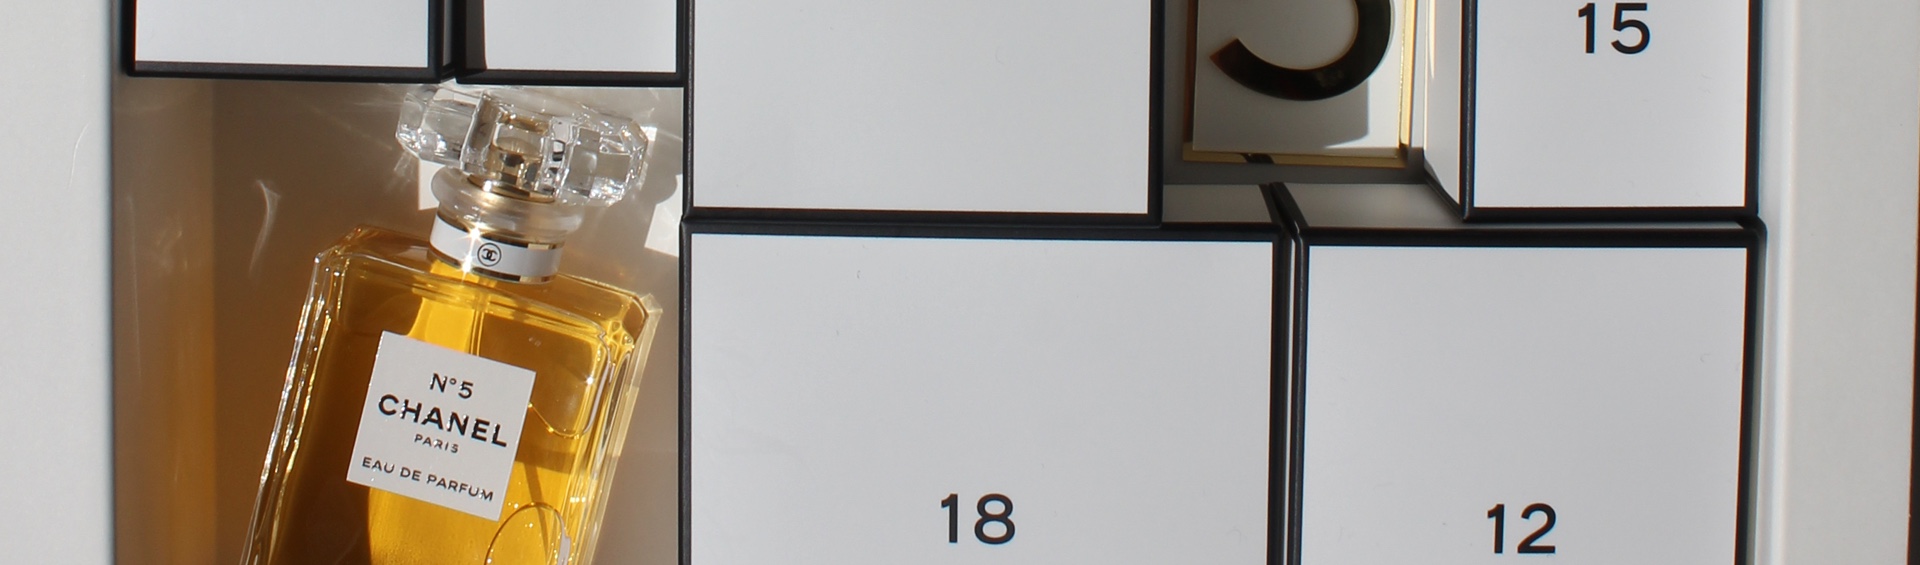 Chanel advent calendar - In The Know